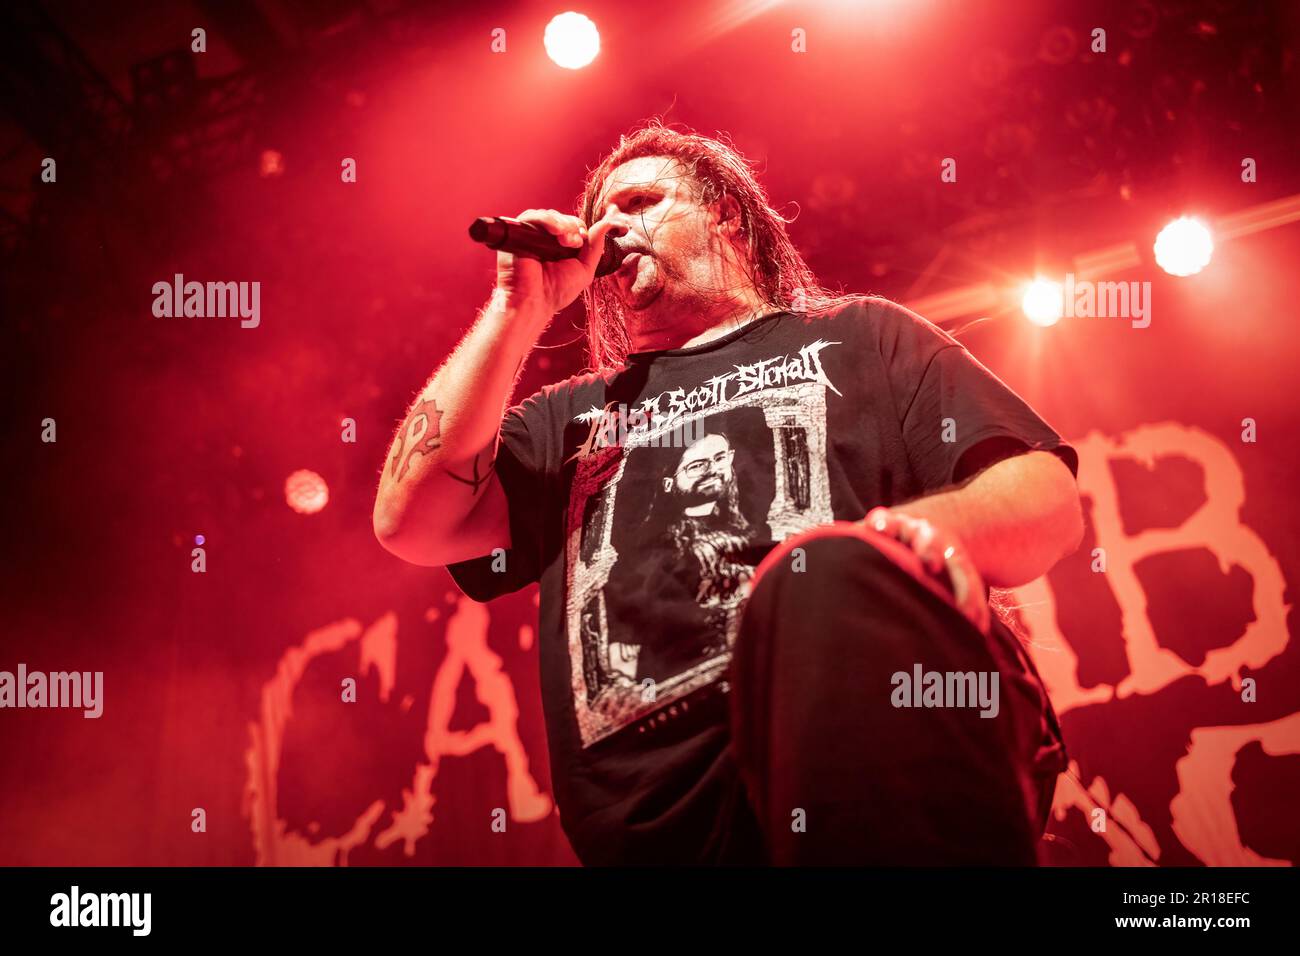 Oslo, Norway. 06th, April 2023. The American death metal band Cannibal Corpse performs a live concert at Rockefeller during the Norwegian metal festival Inferno Metal Festival 2023 in Oslo. Here vocalist George Fisher is seen live on stage. (Photo credit: Gonzales Photo - Terje Dokken). Stock Photo